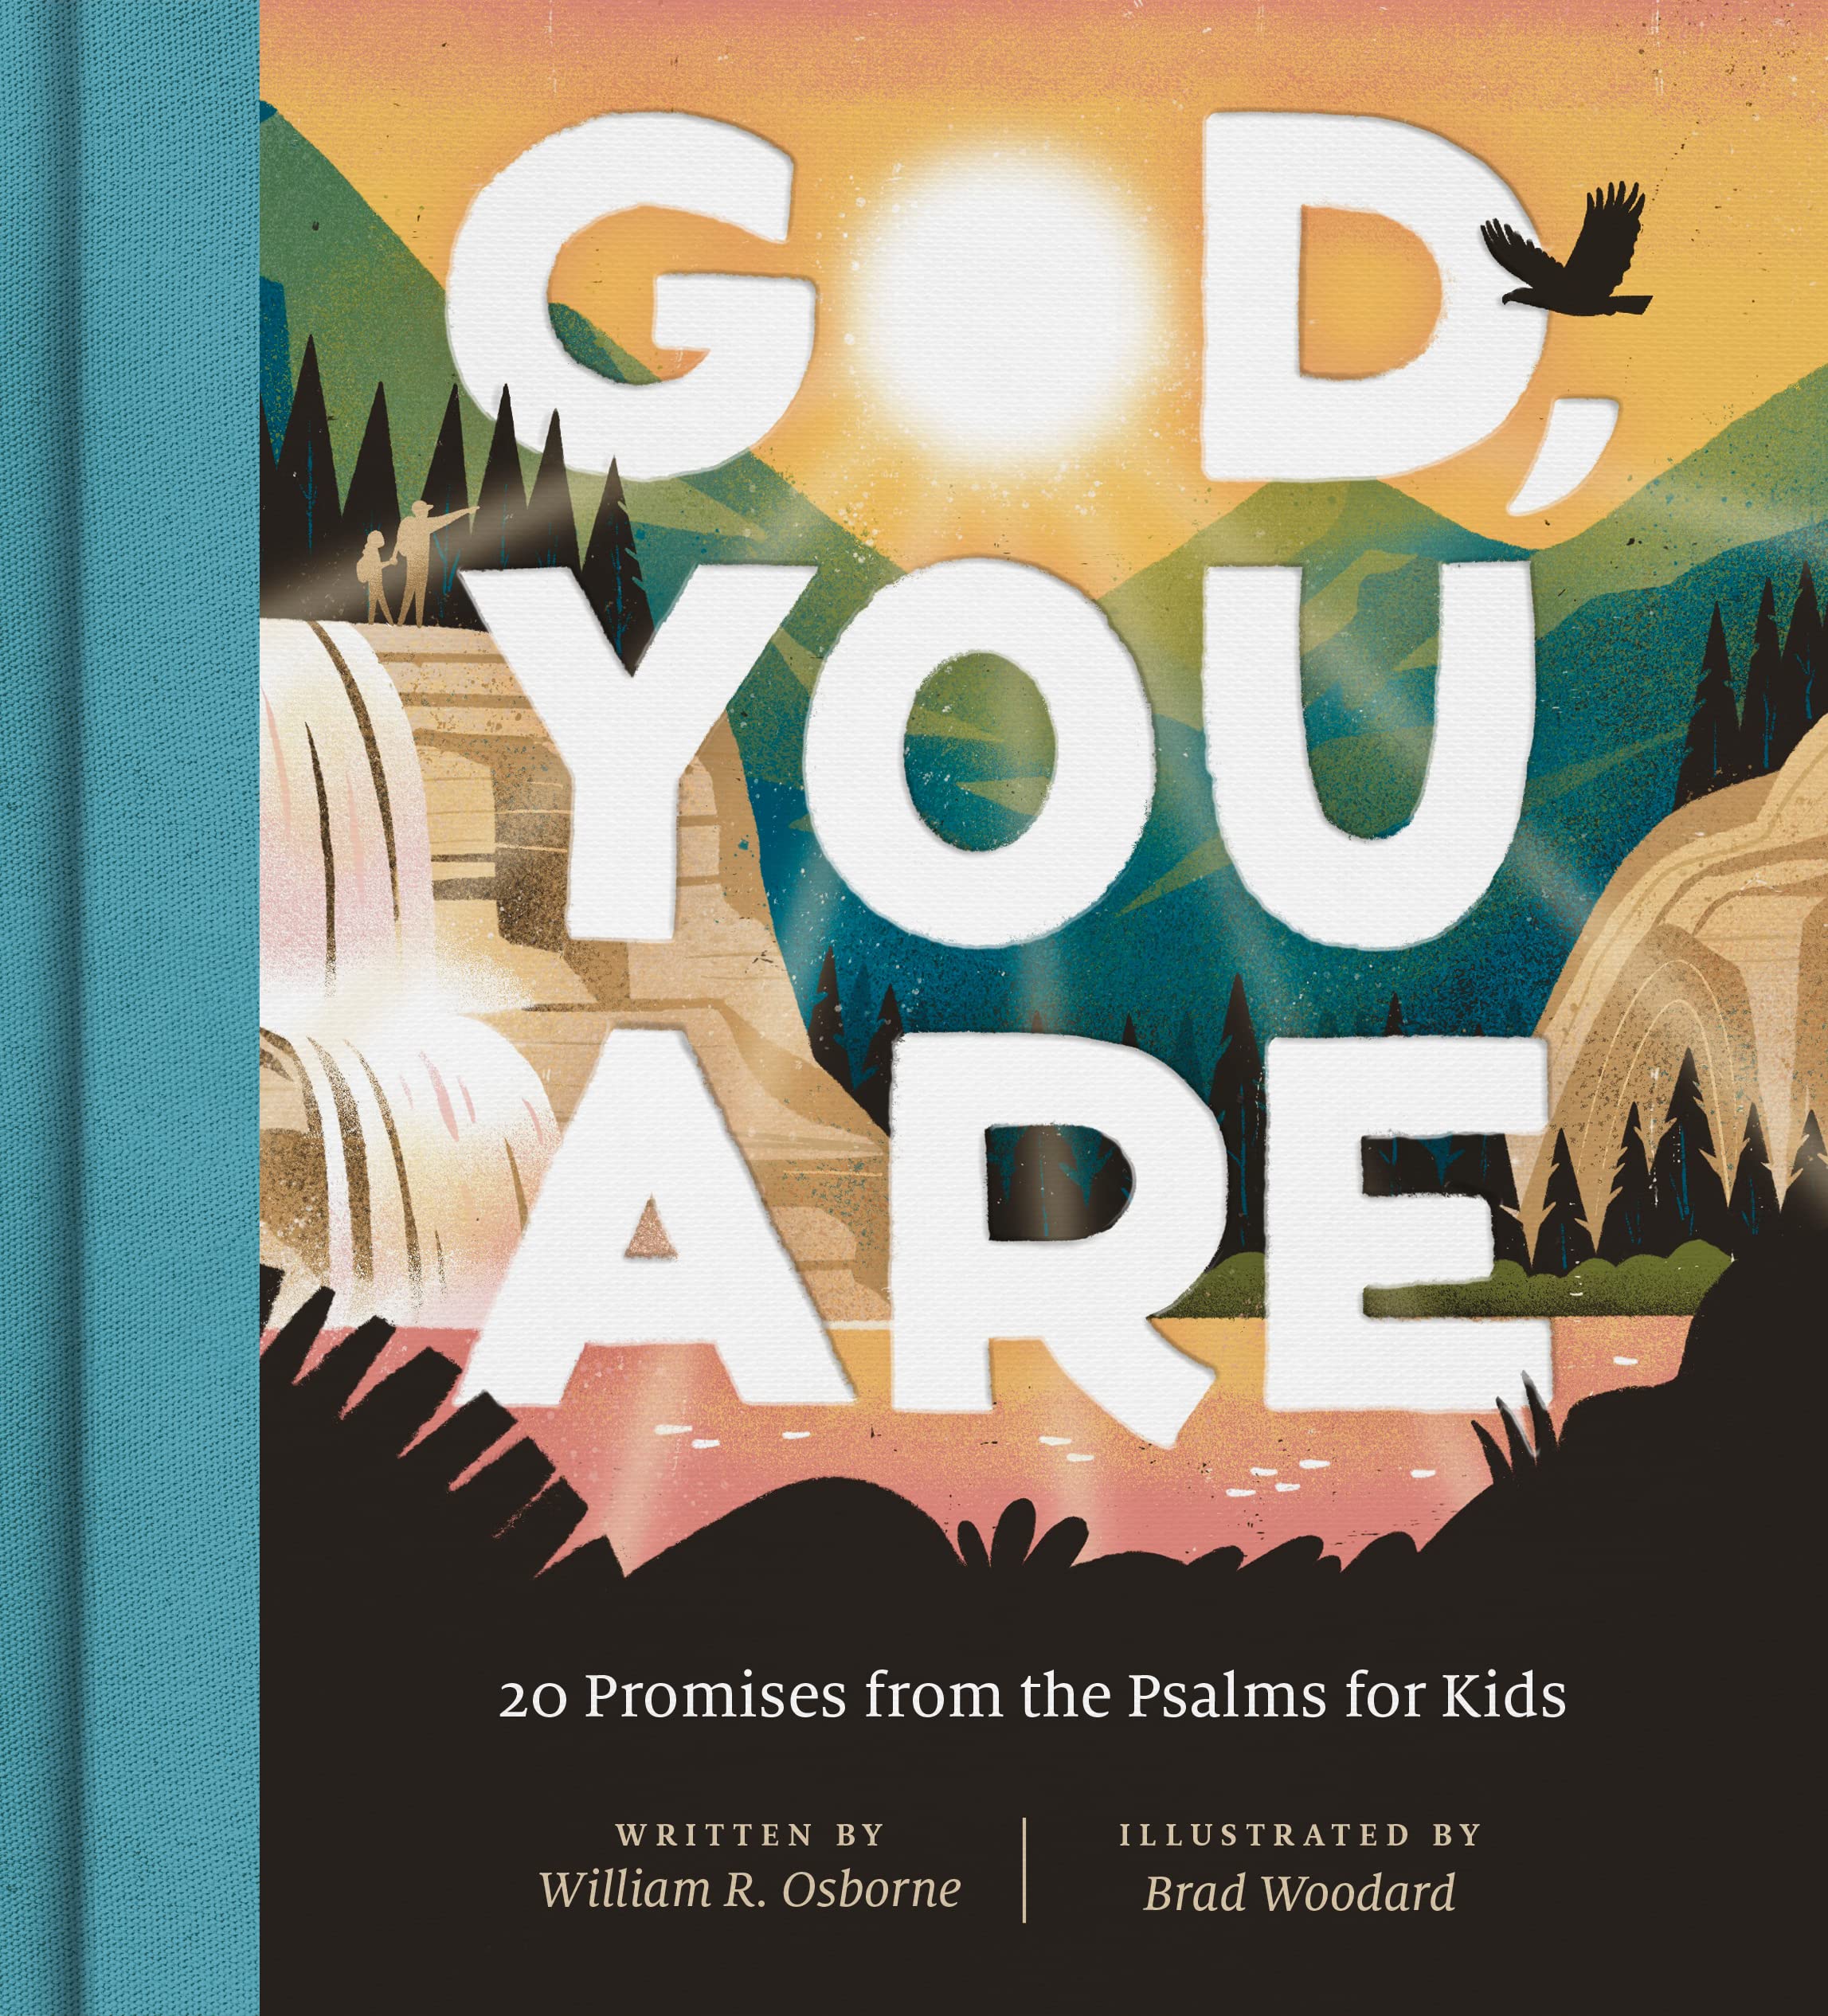 Image of God, You Are: 20 Promises from the Psalms for Kids